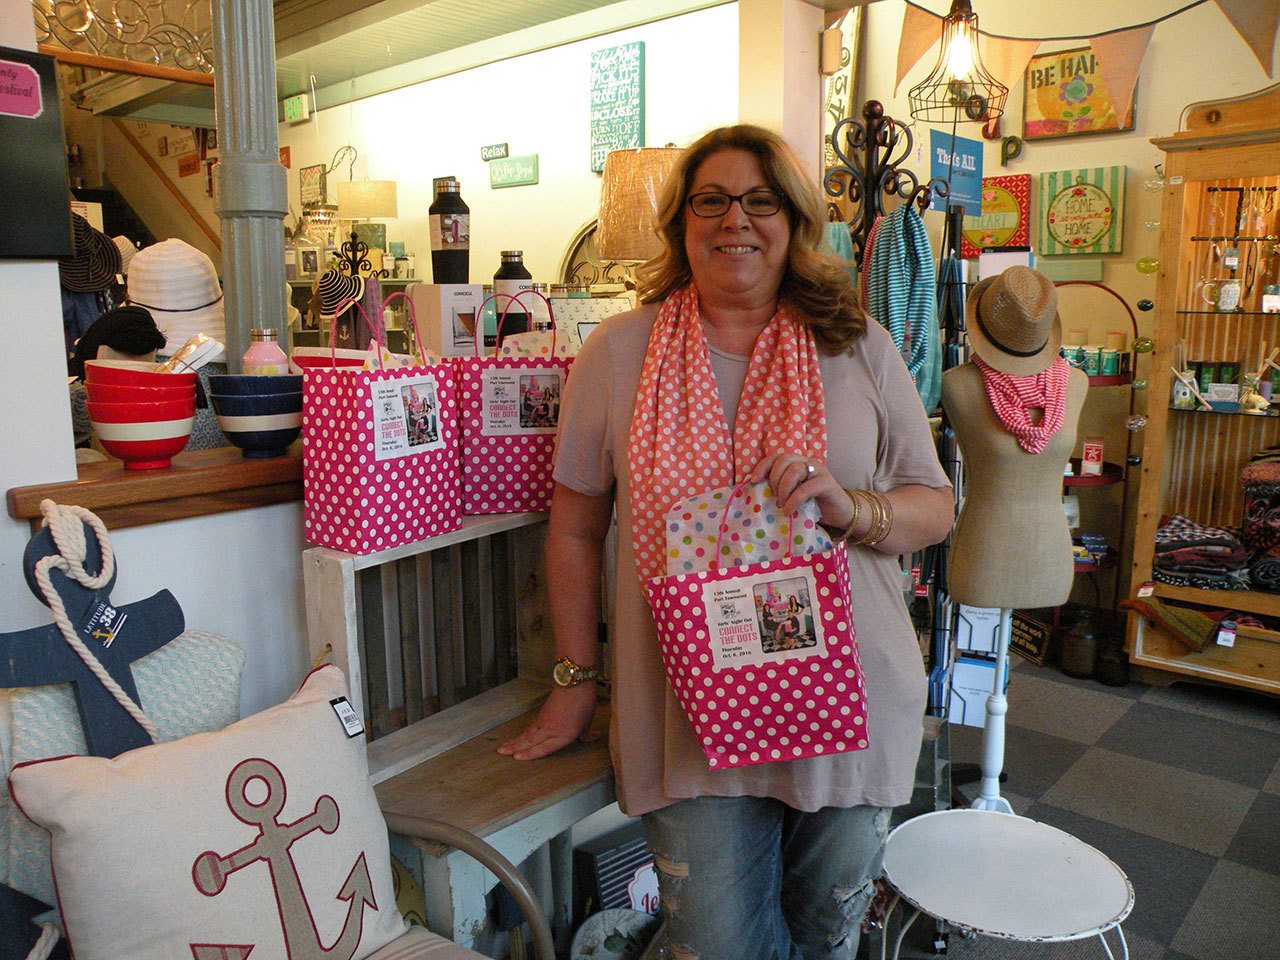 Marci Spittler of Tickled Pink shows off the polka dot theme for Port Townsend Main Street’s Girls’ Night Out. Tickled Pink donated 500 polka dot scarves for this year’s goodie bags. (Mari Mullen)